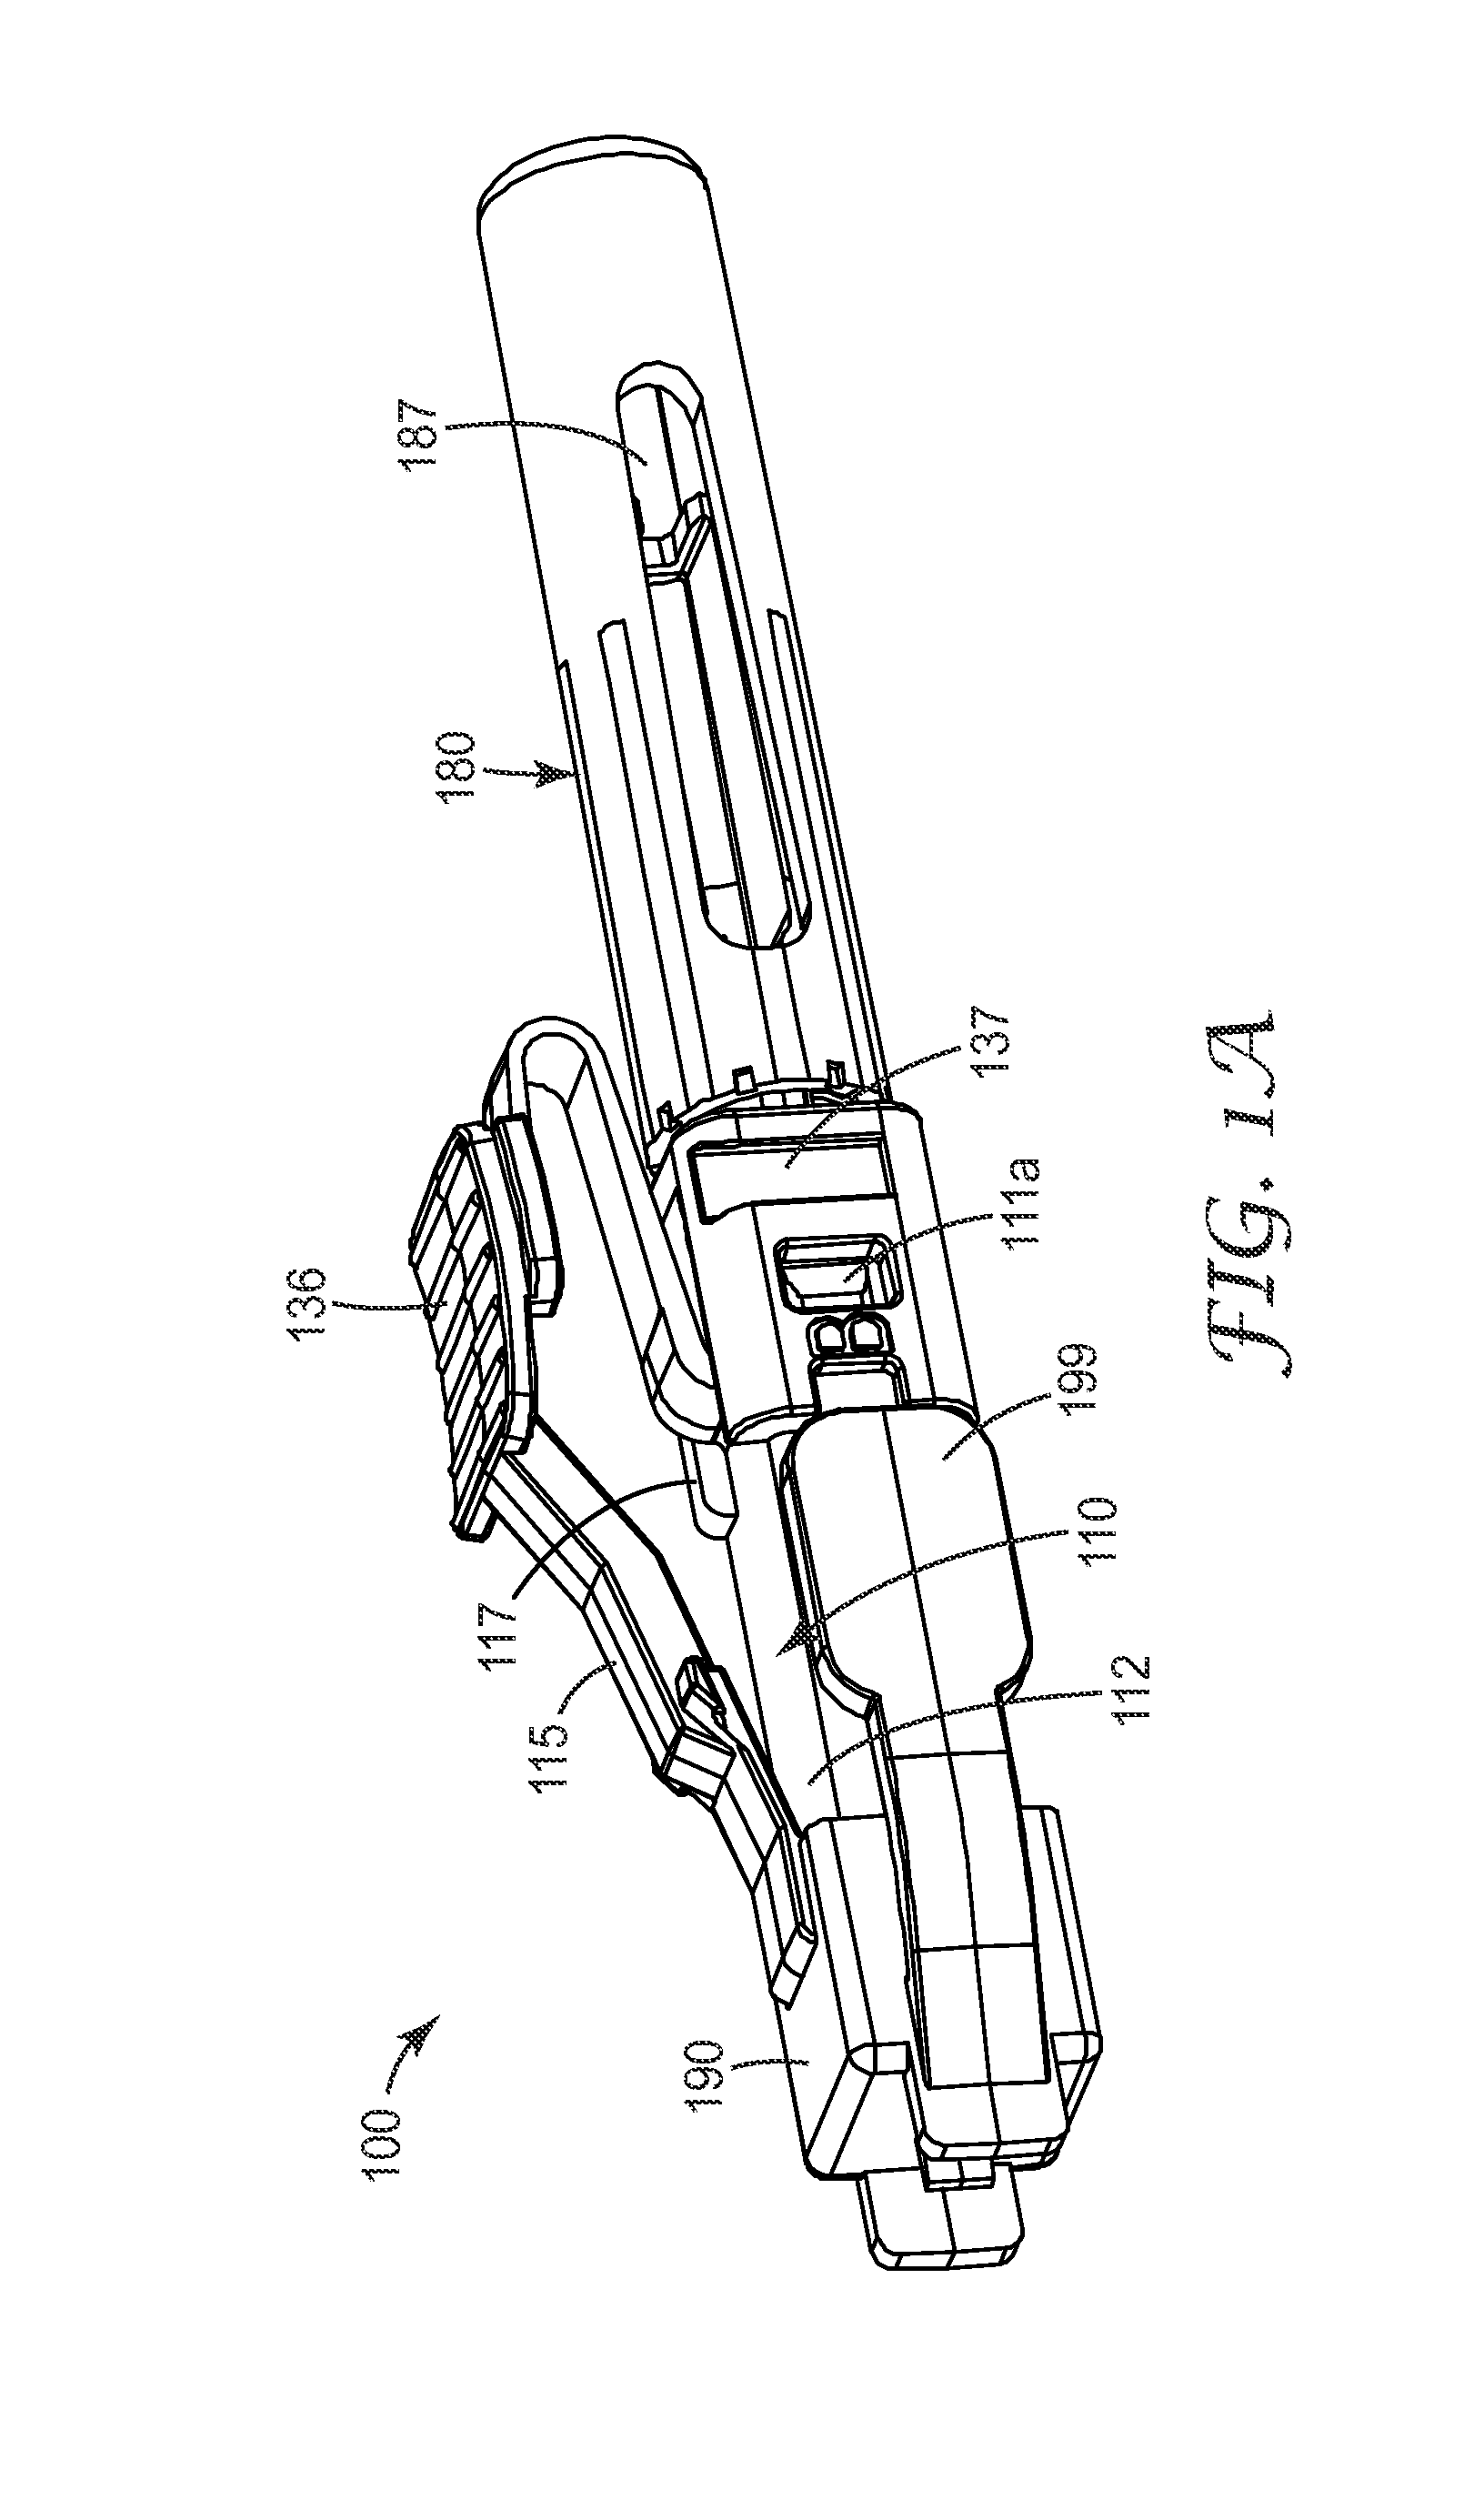 Field terminable optical connector with splice element for jacketed cable